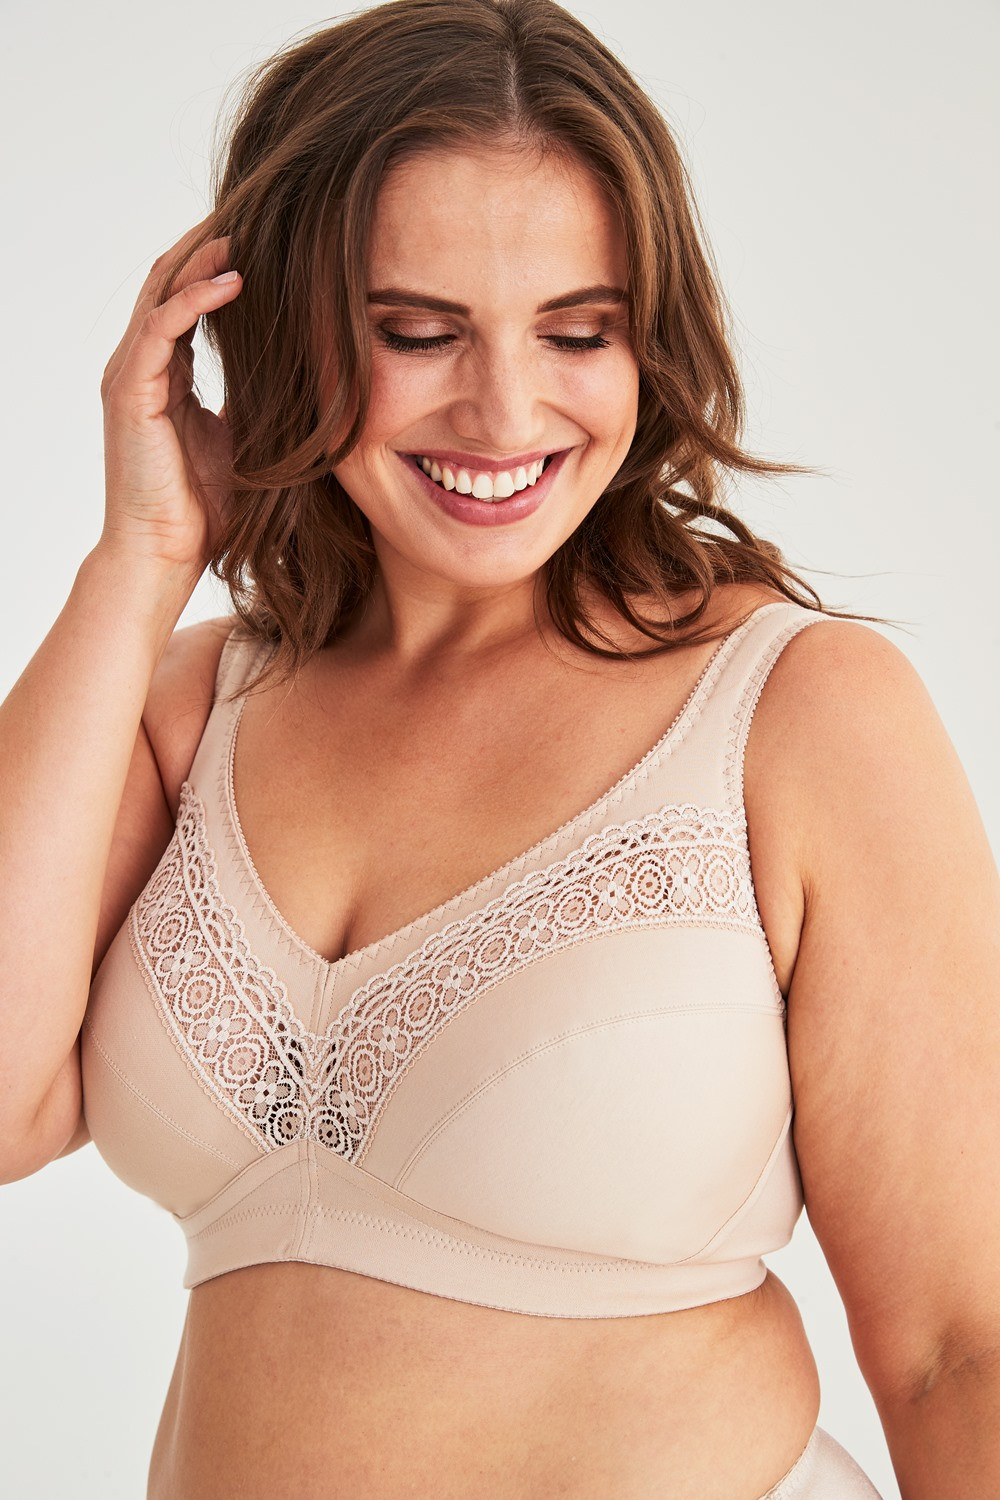 Floral nursing nonwired bra. Cotton, padded cups